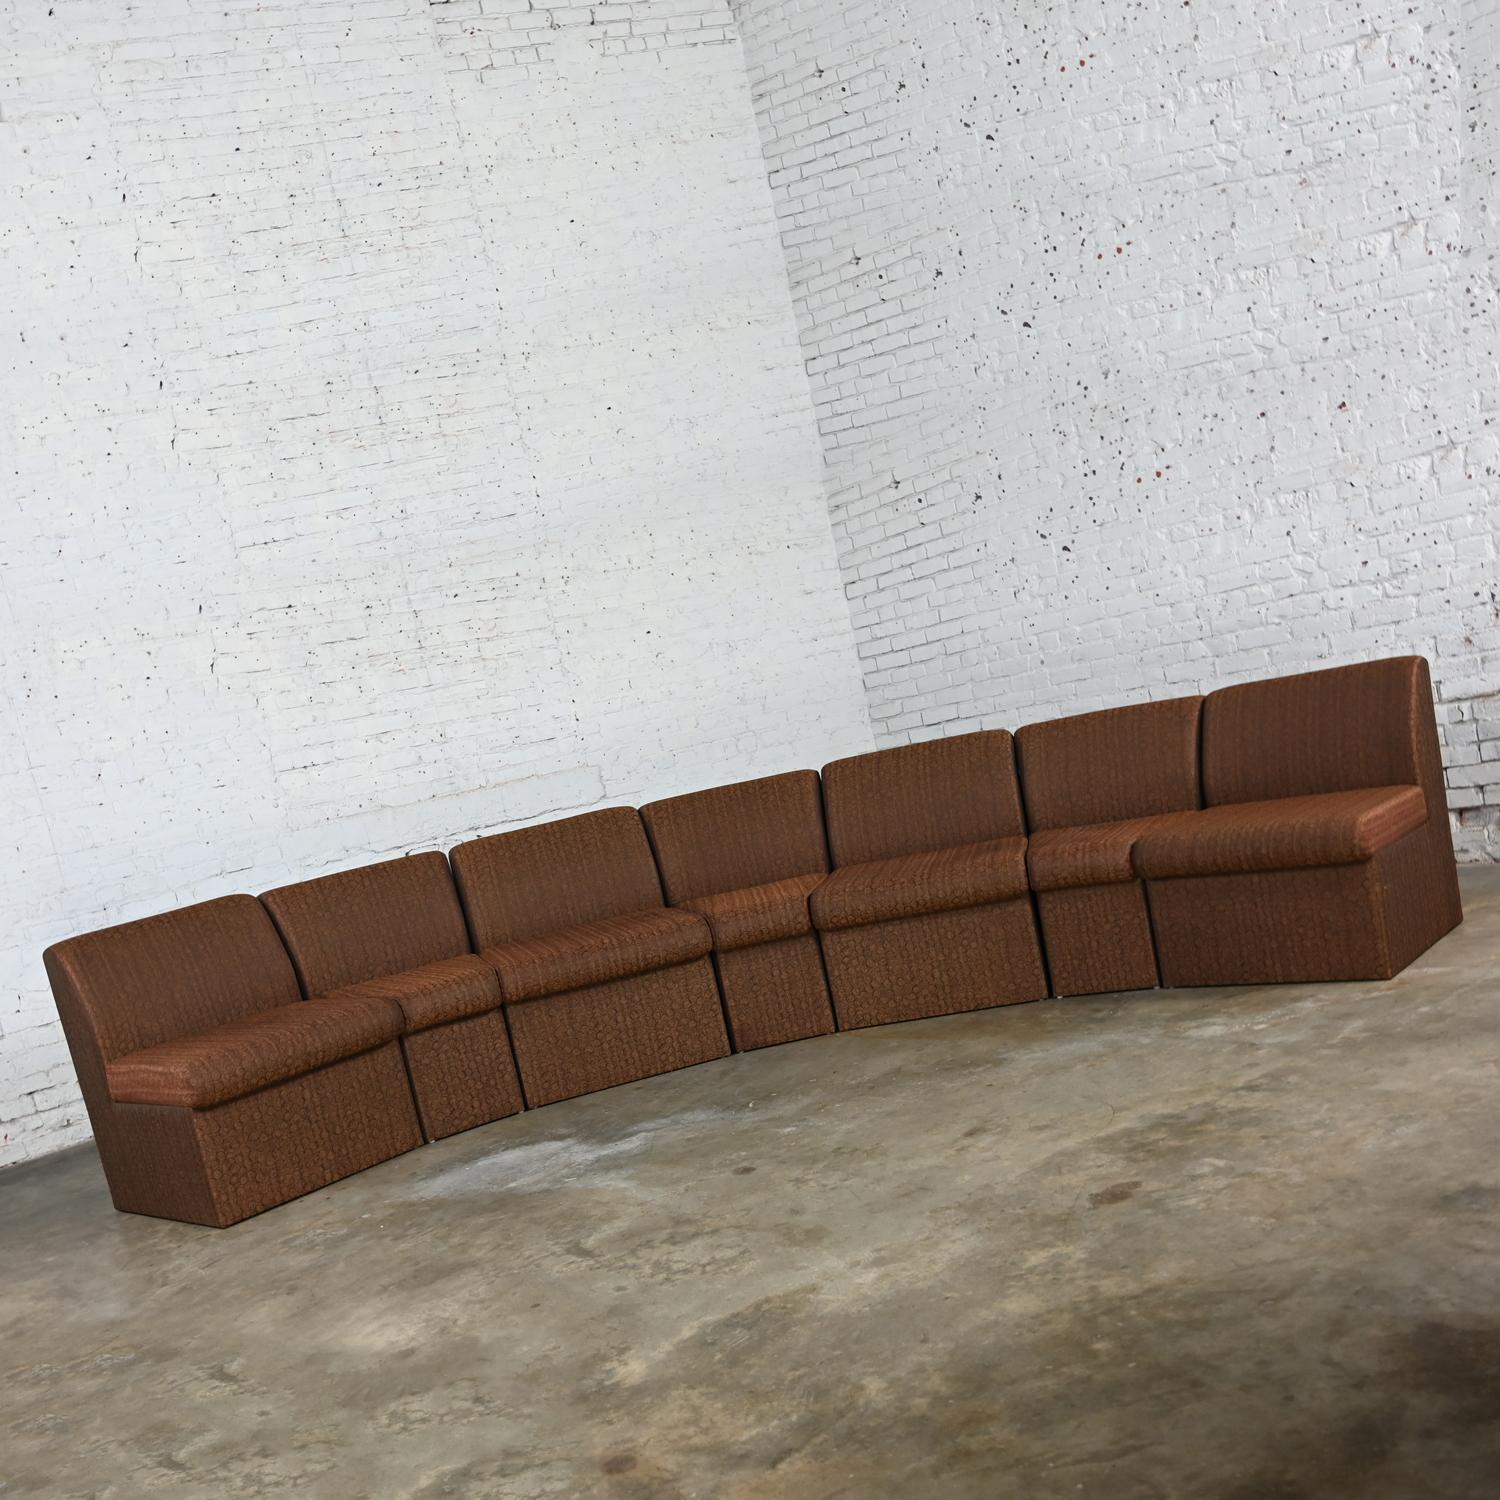 Fabulous vintage Modern Global Upholstery Company brown all upholstered seven-piece sectional sofa comprised of four straight pieces and three wedges. Beautiful condition, keeping in mind that this is vintage and not new so will have signs of use